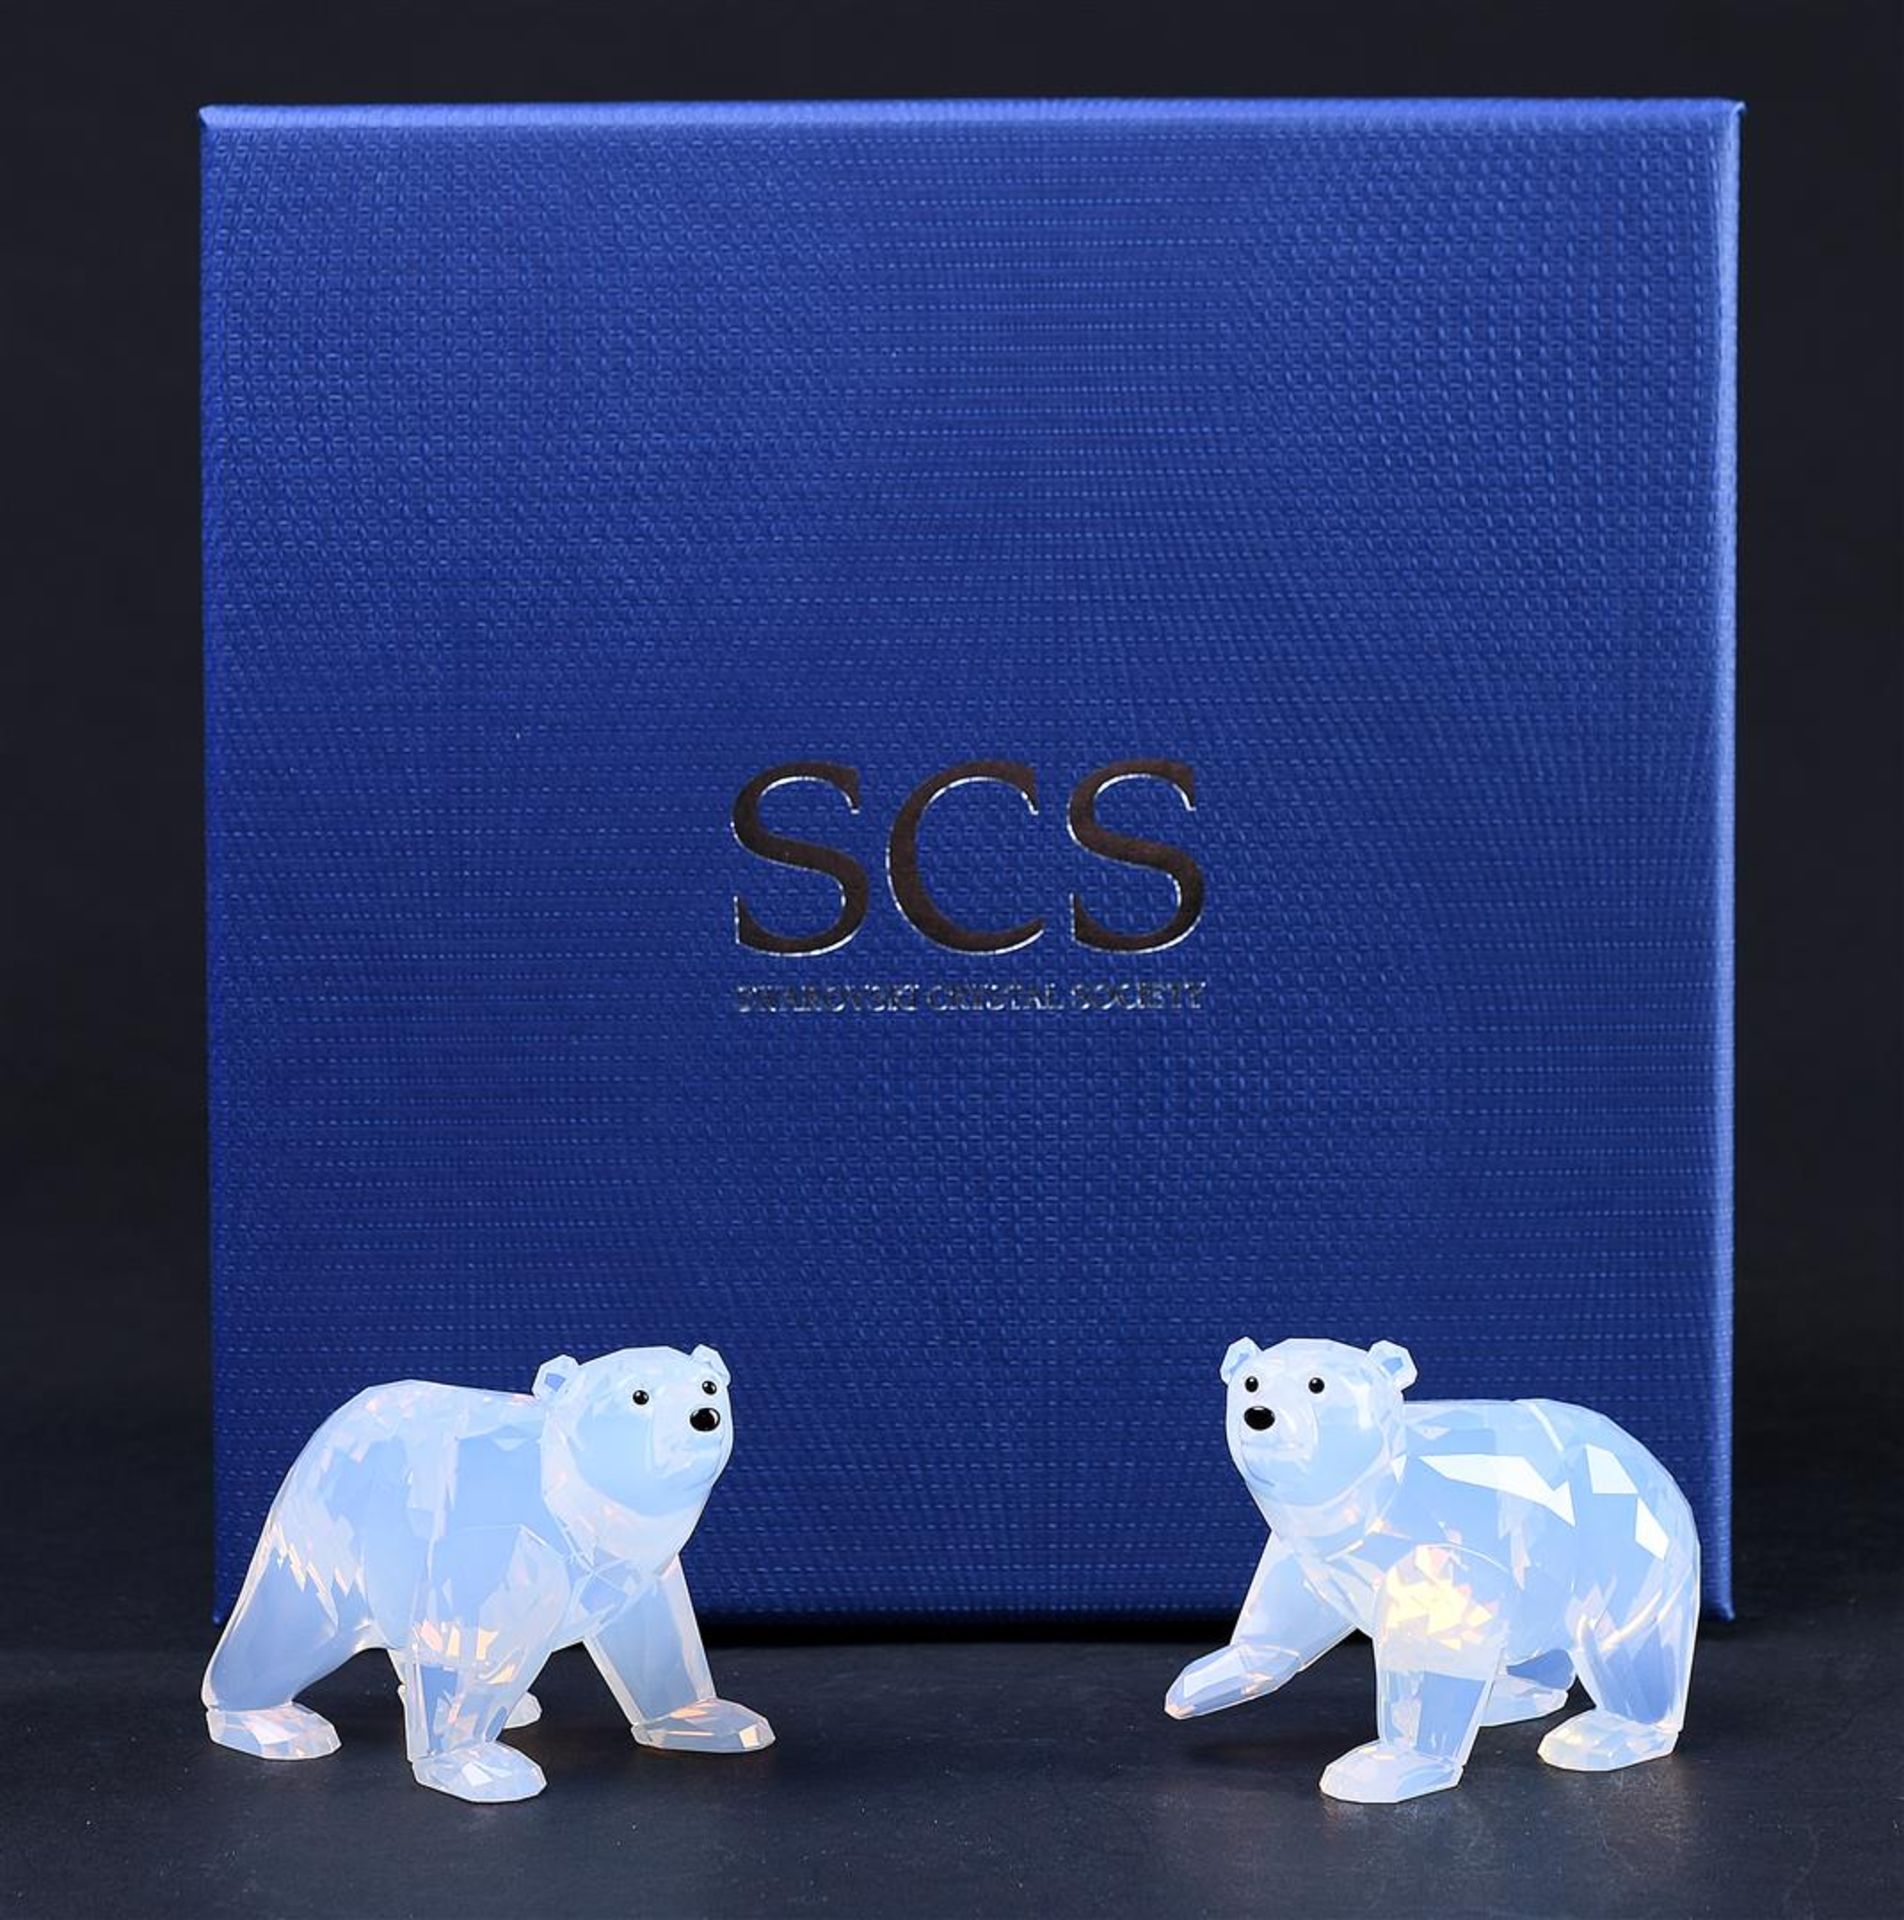 Swarovski SCS, Annual Edition 2011 - Arctic Bear Boy White Opal, Year of Edition 2011 ,1080774. Incl - Image 5 of 5